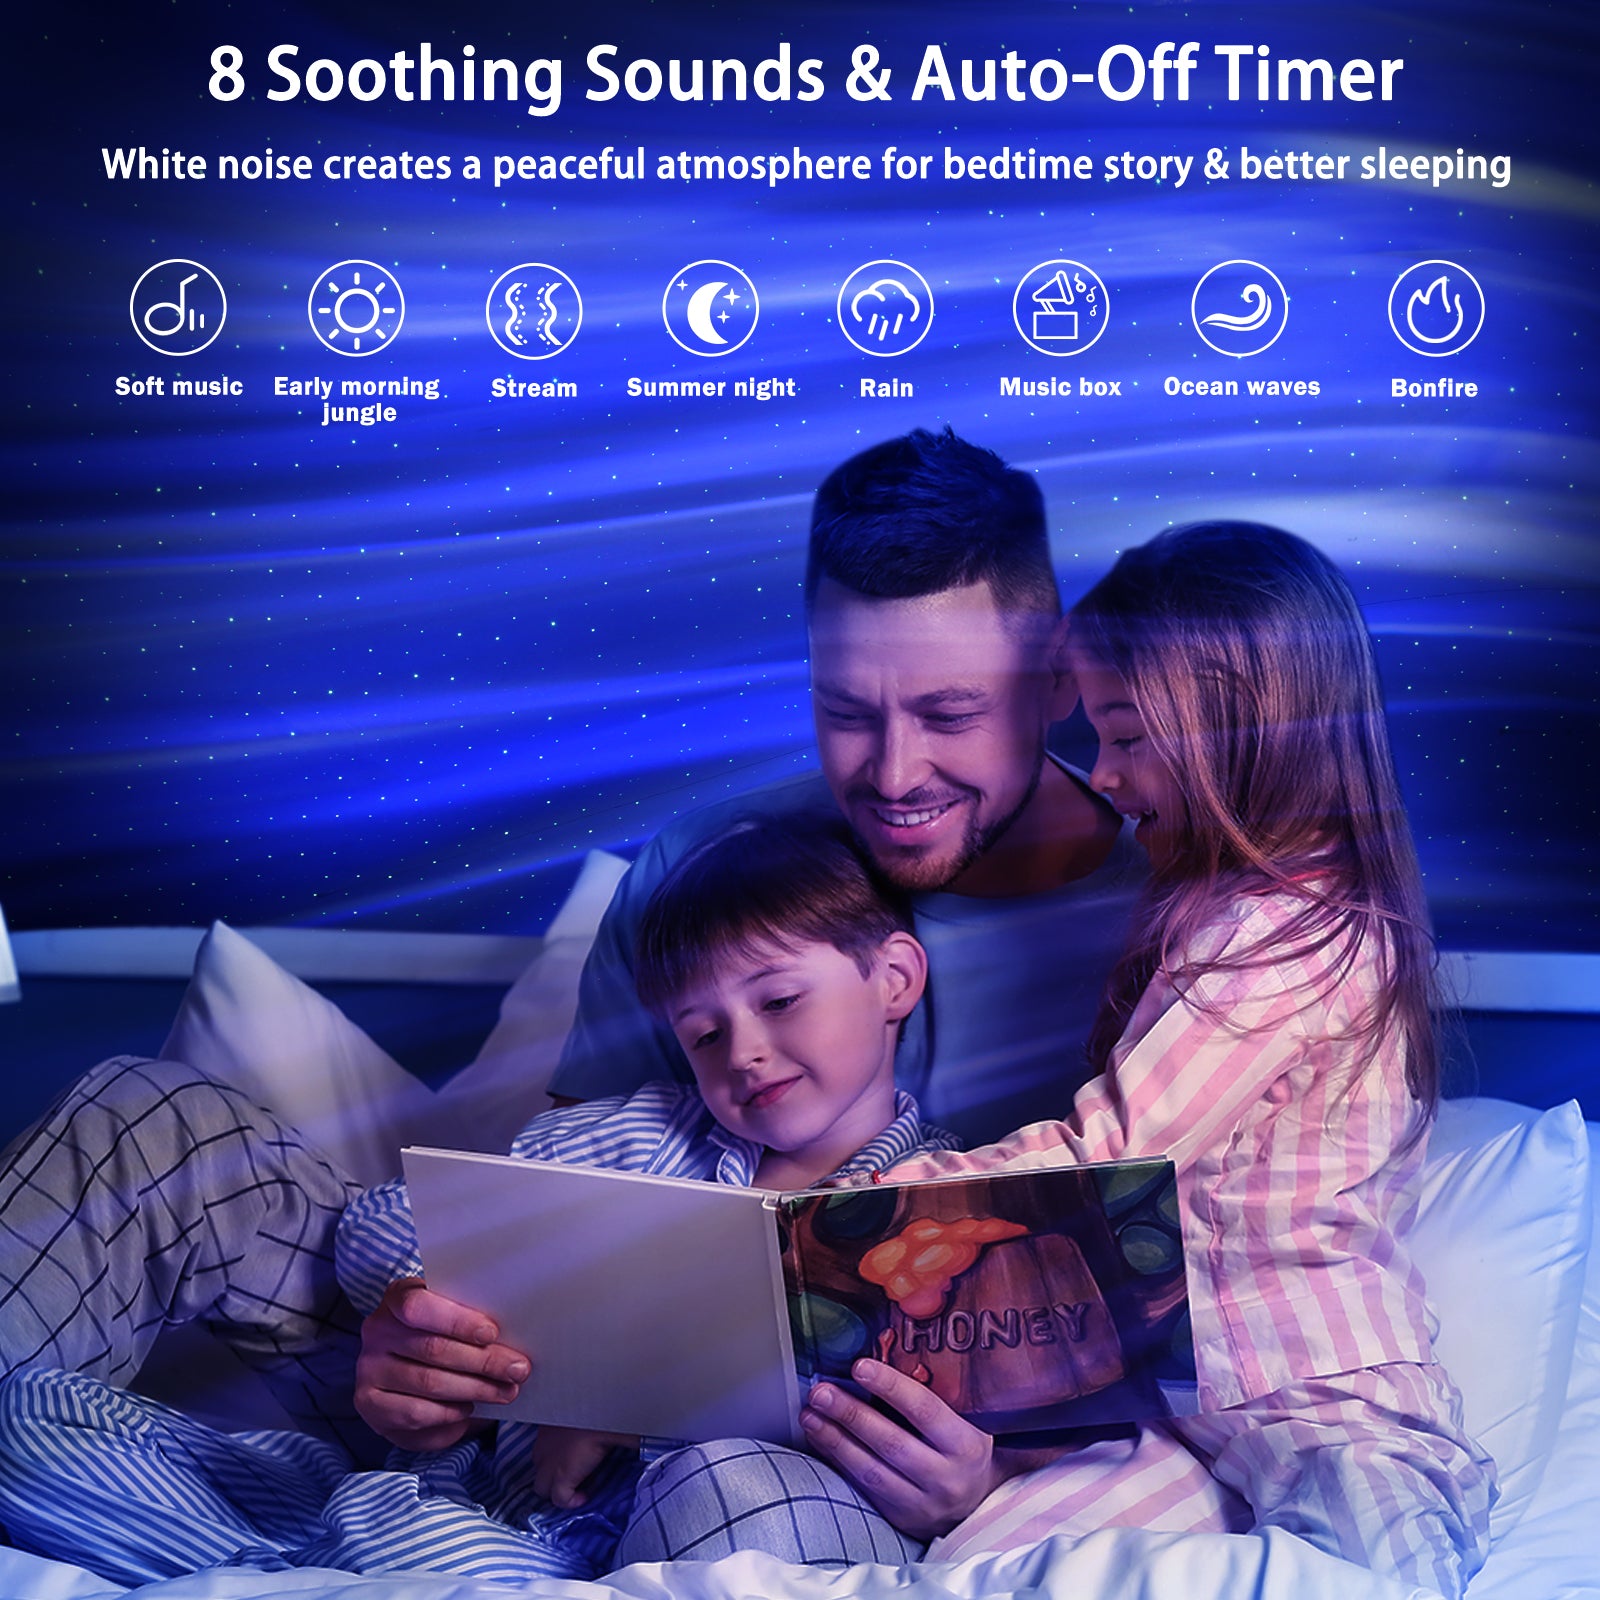 Galaxy Projector, Star Projector 16 Lighting Effects LED Night Light  Projector with Bluetooth Music Speaker & Remote Control & Timer, Aurora  Projector